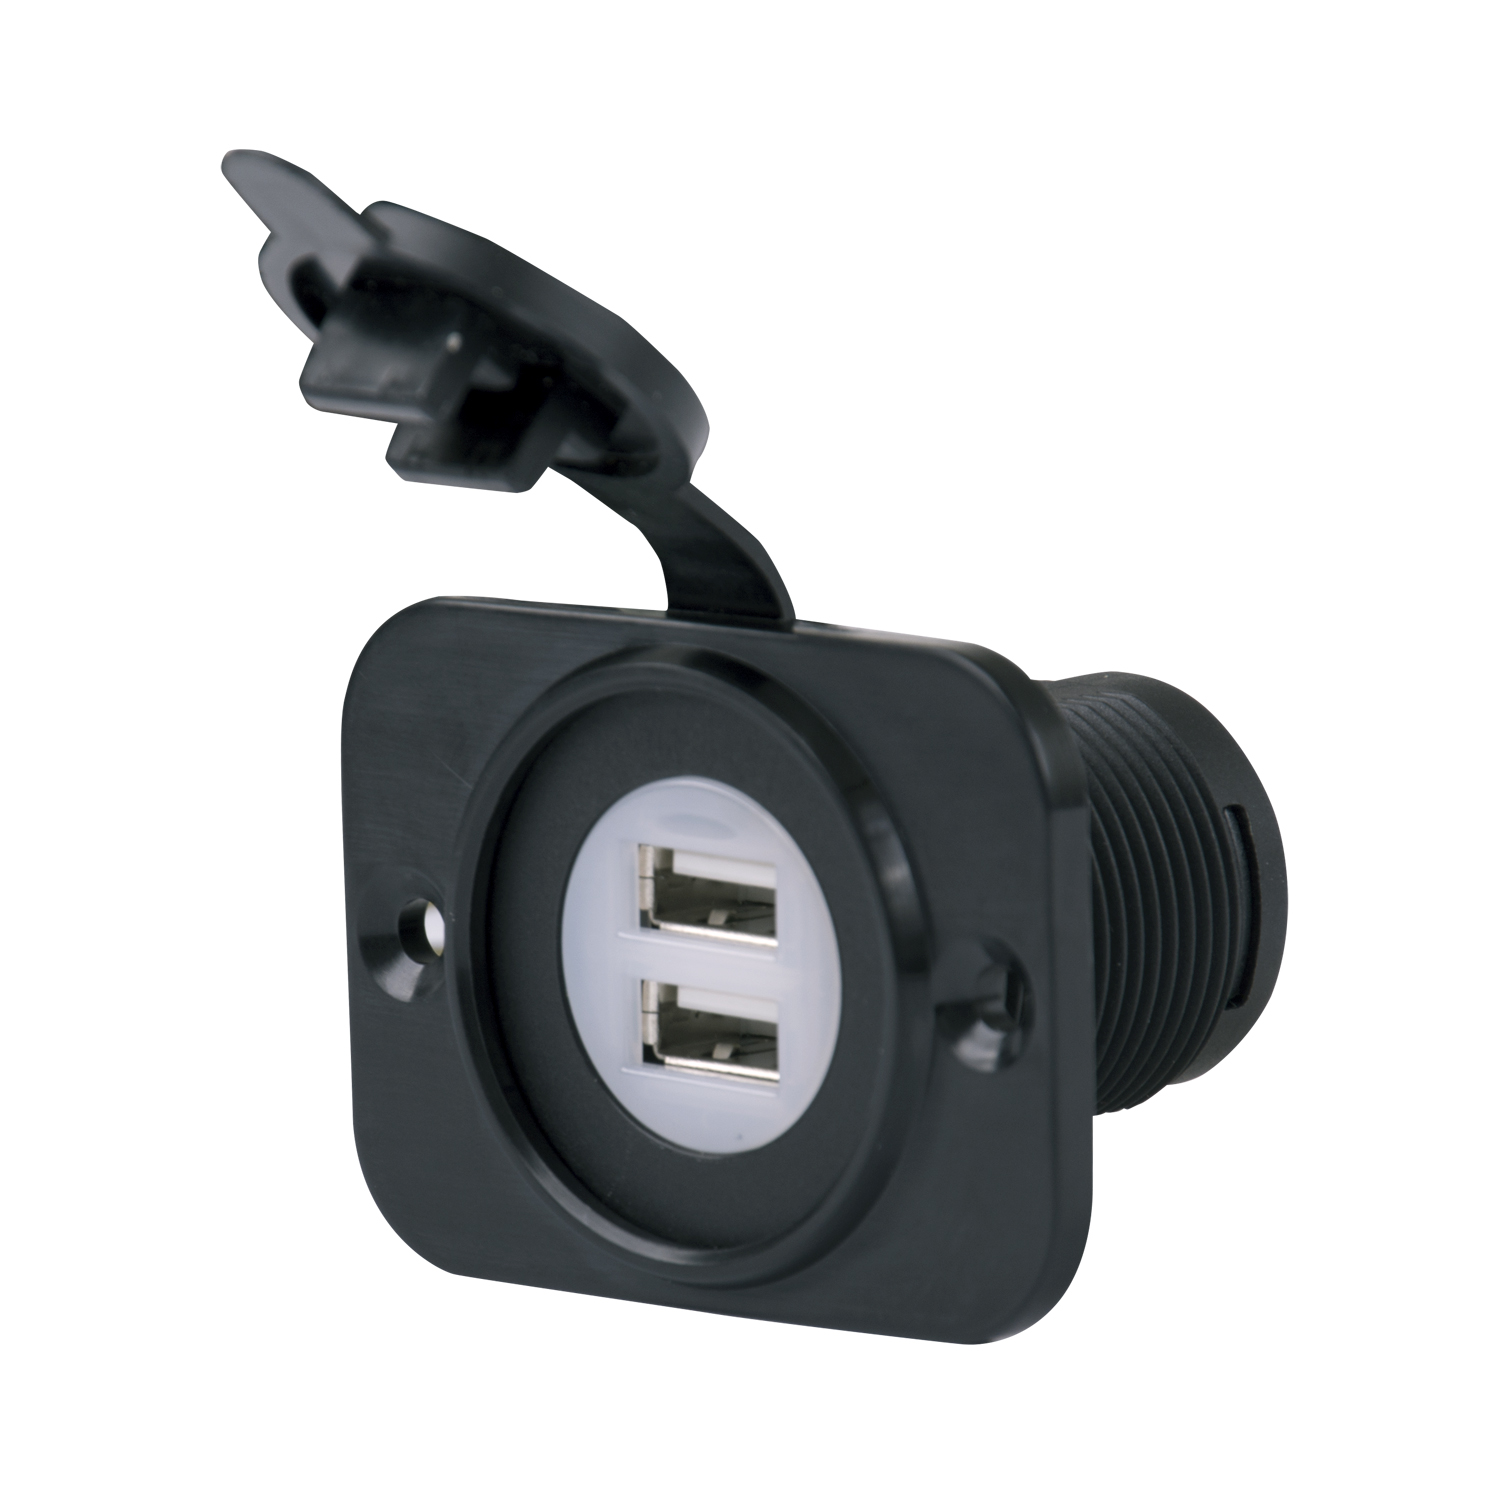 SeaLink Deluxe Dual USB Charger Receptacle